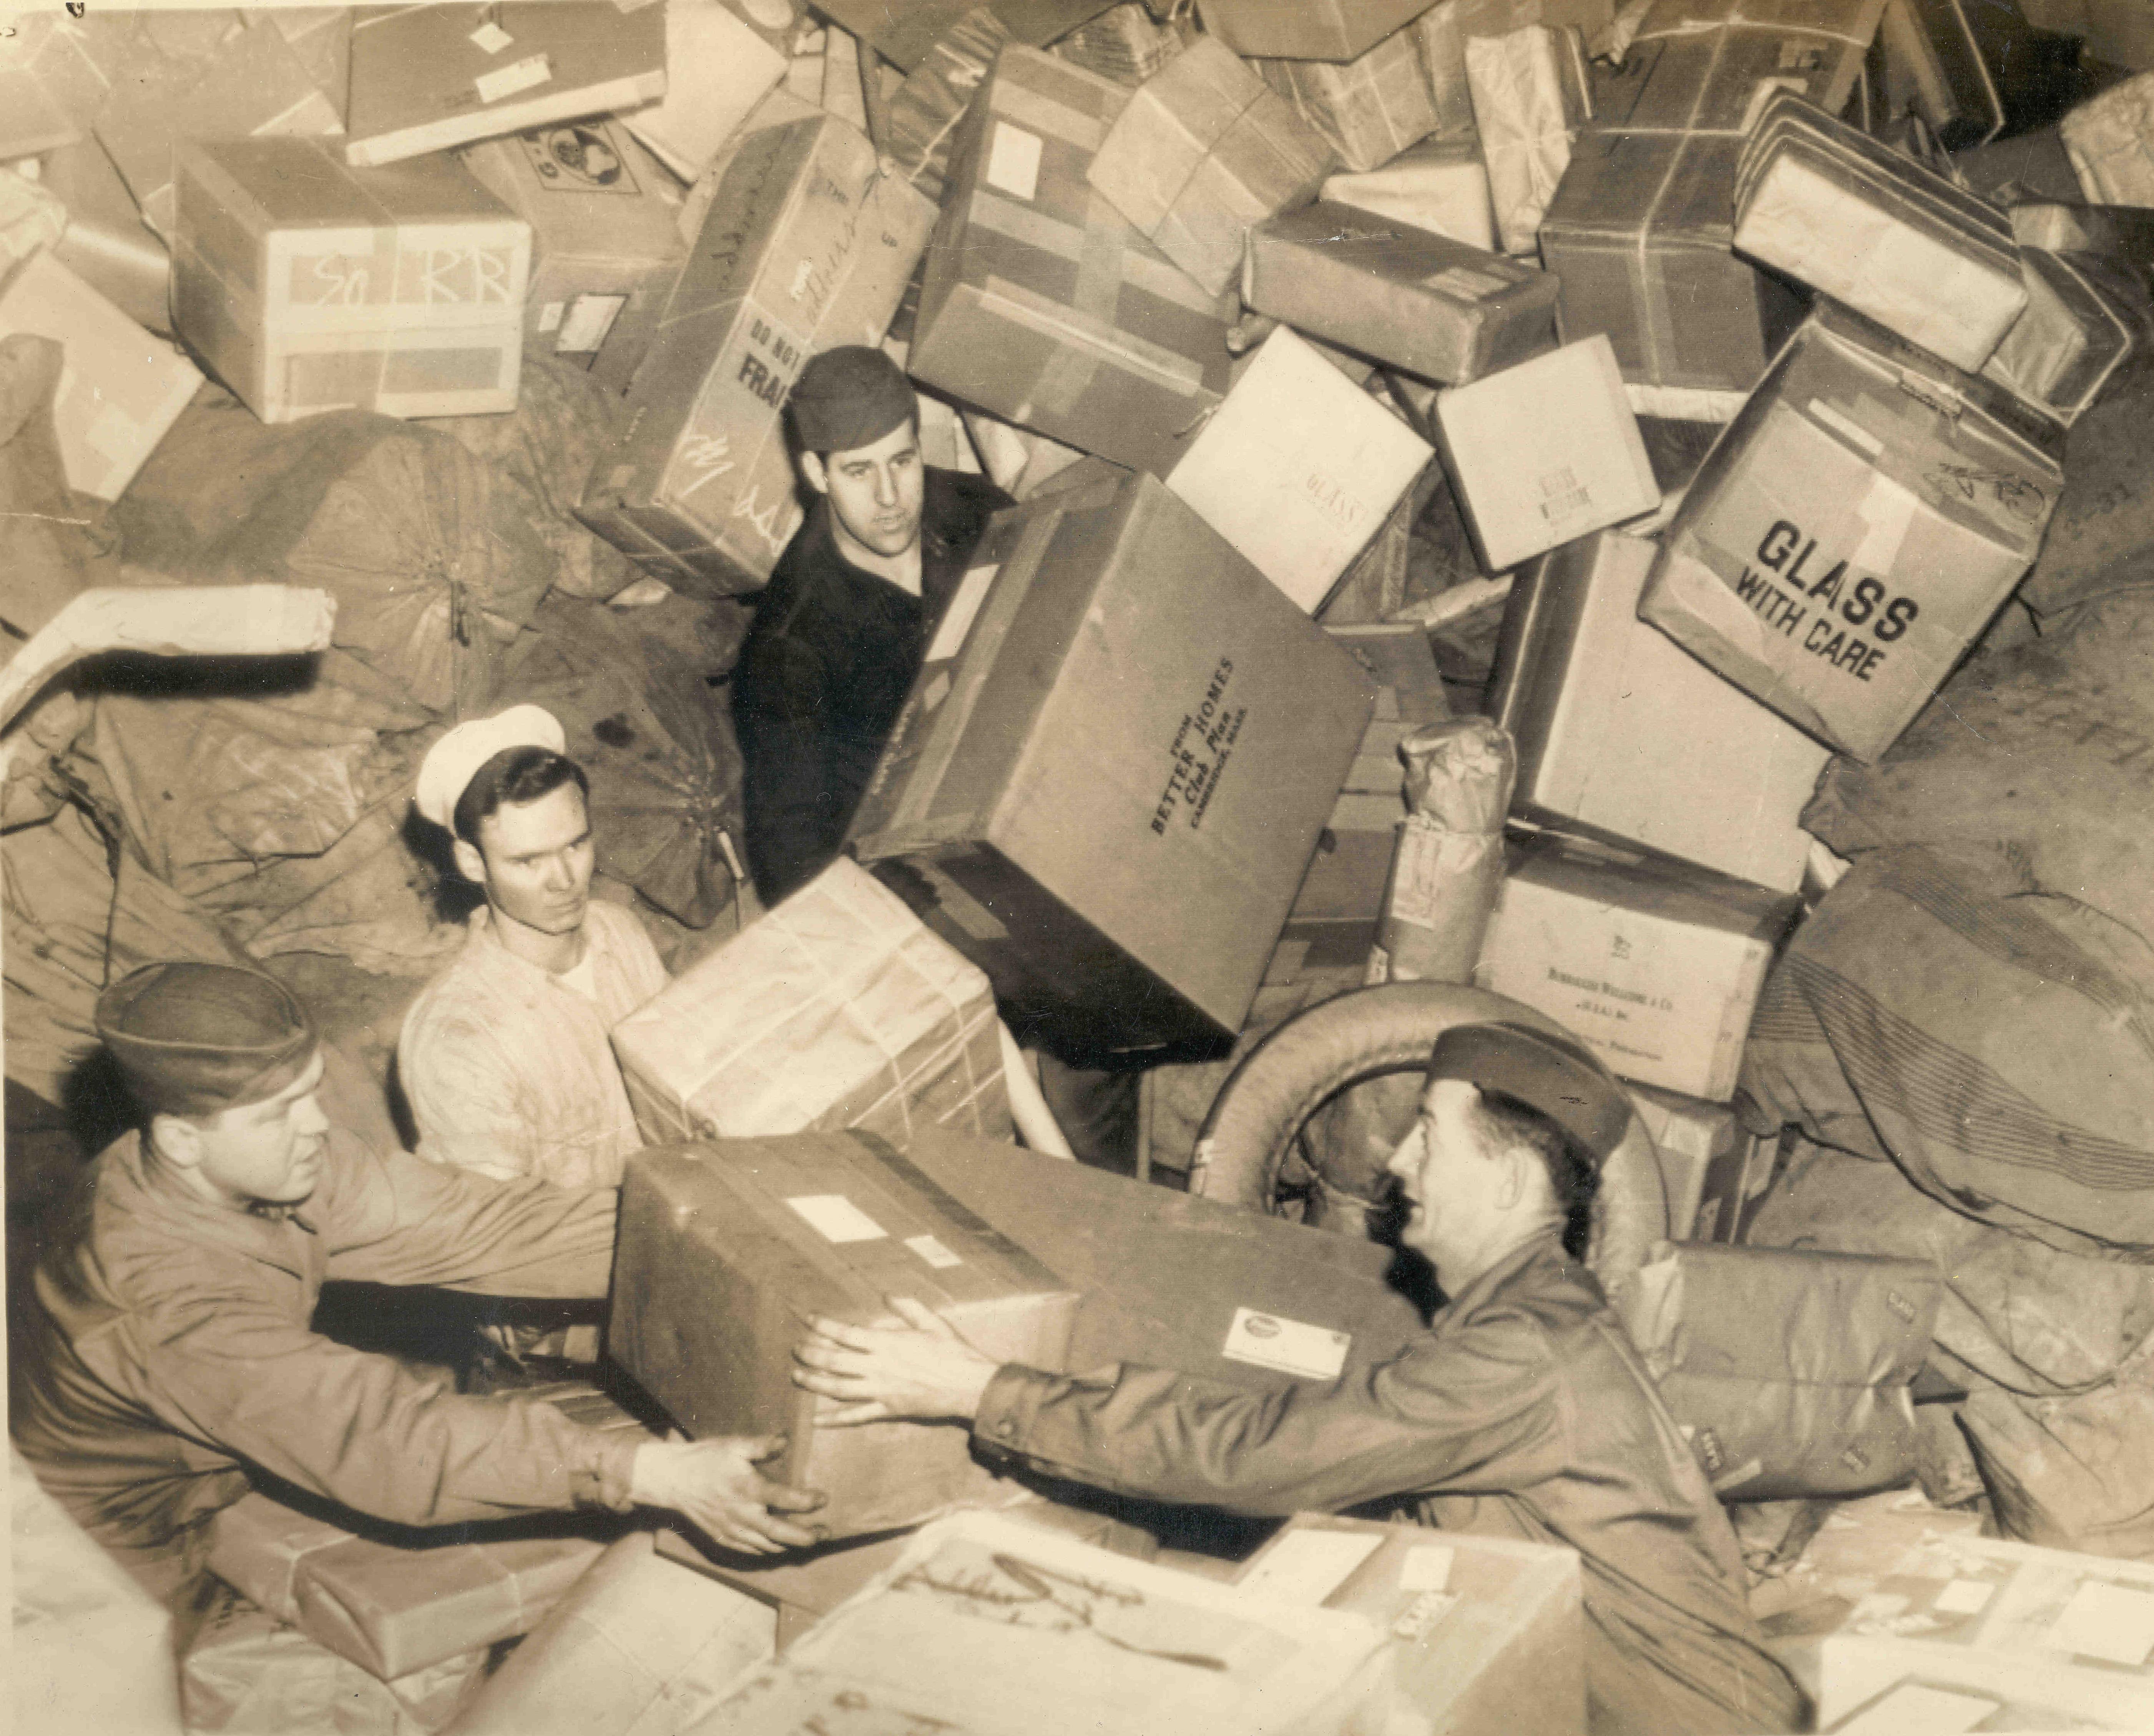 U.S. troops almost buried by parcels do their best to handle that year's holiday mail